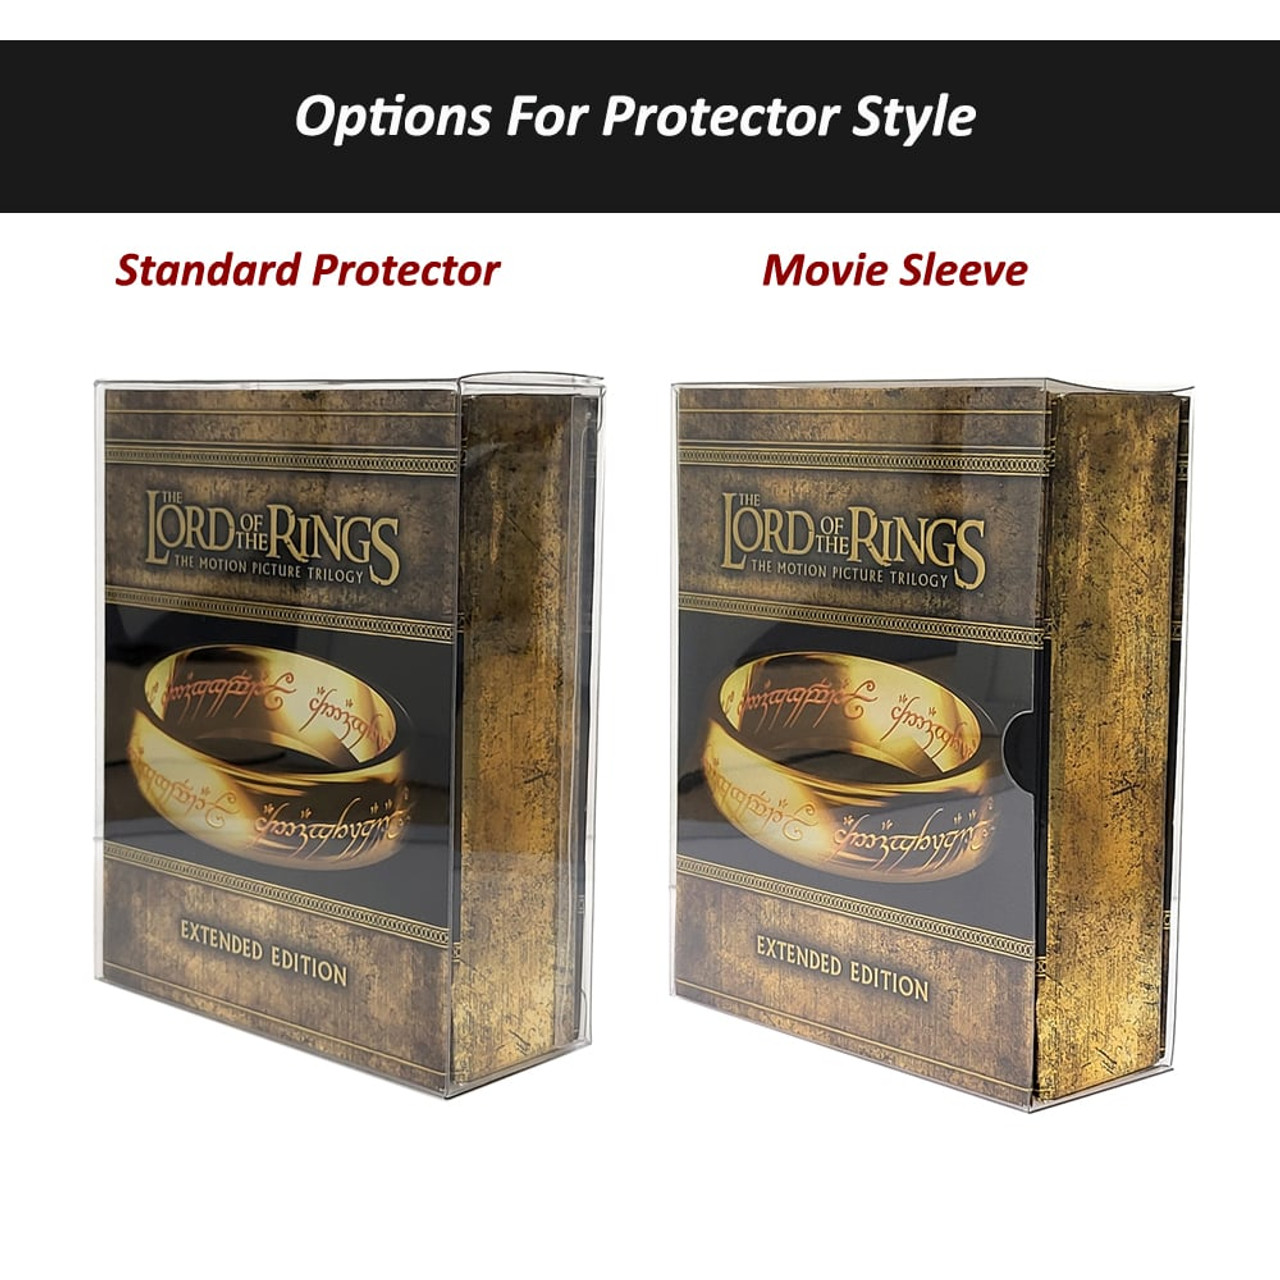 Protector For Cold war creatures LE Arrow Video